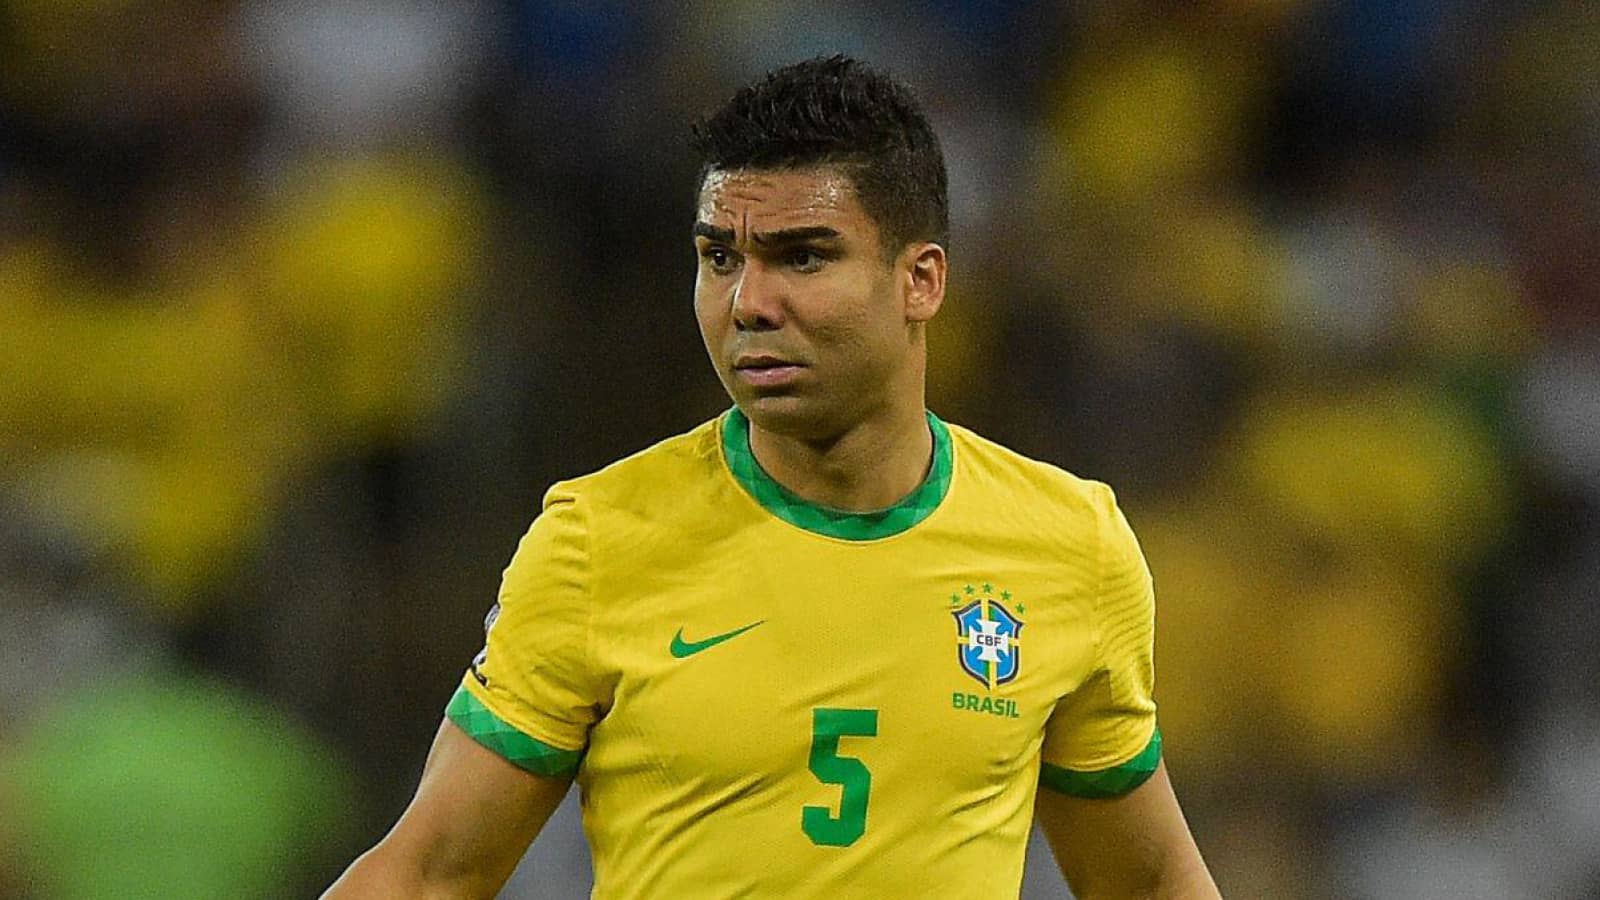 Casemiro has previously captained Brazil national football team